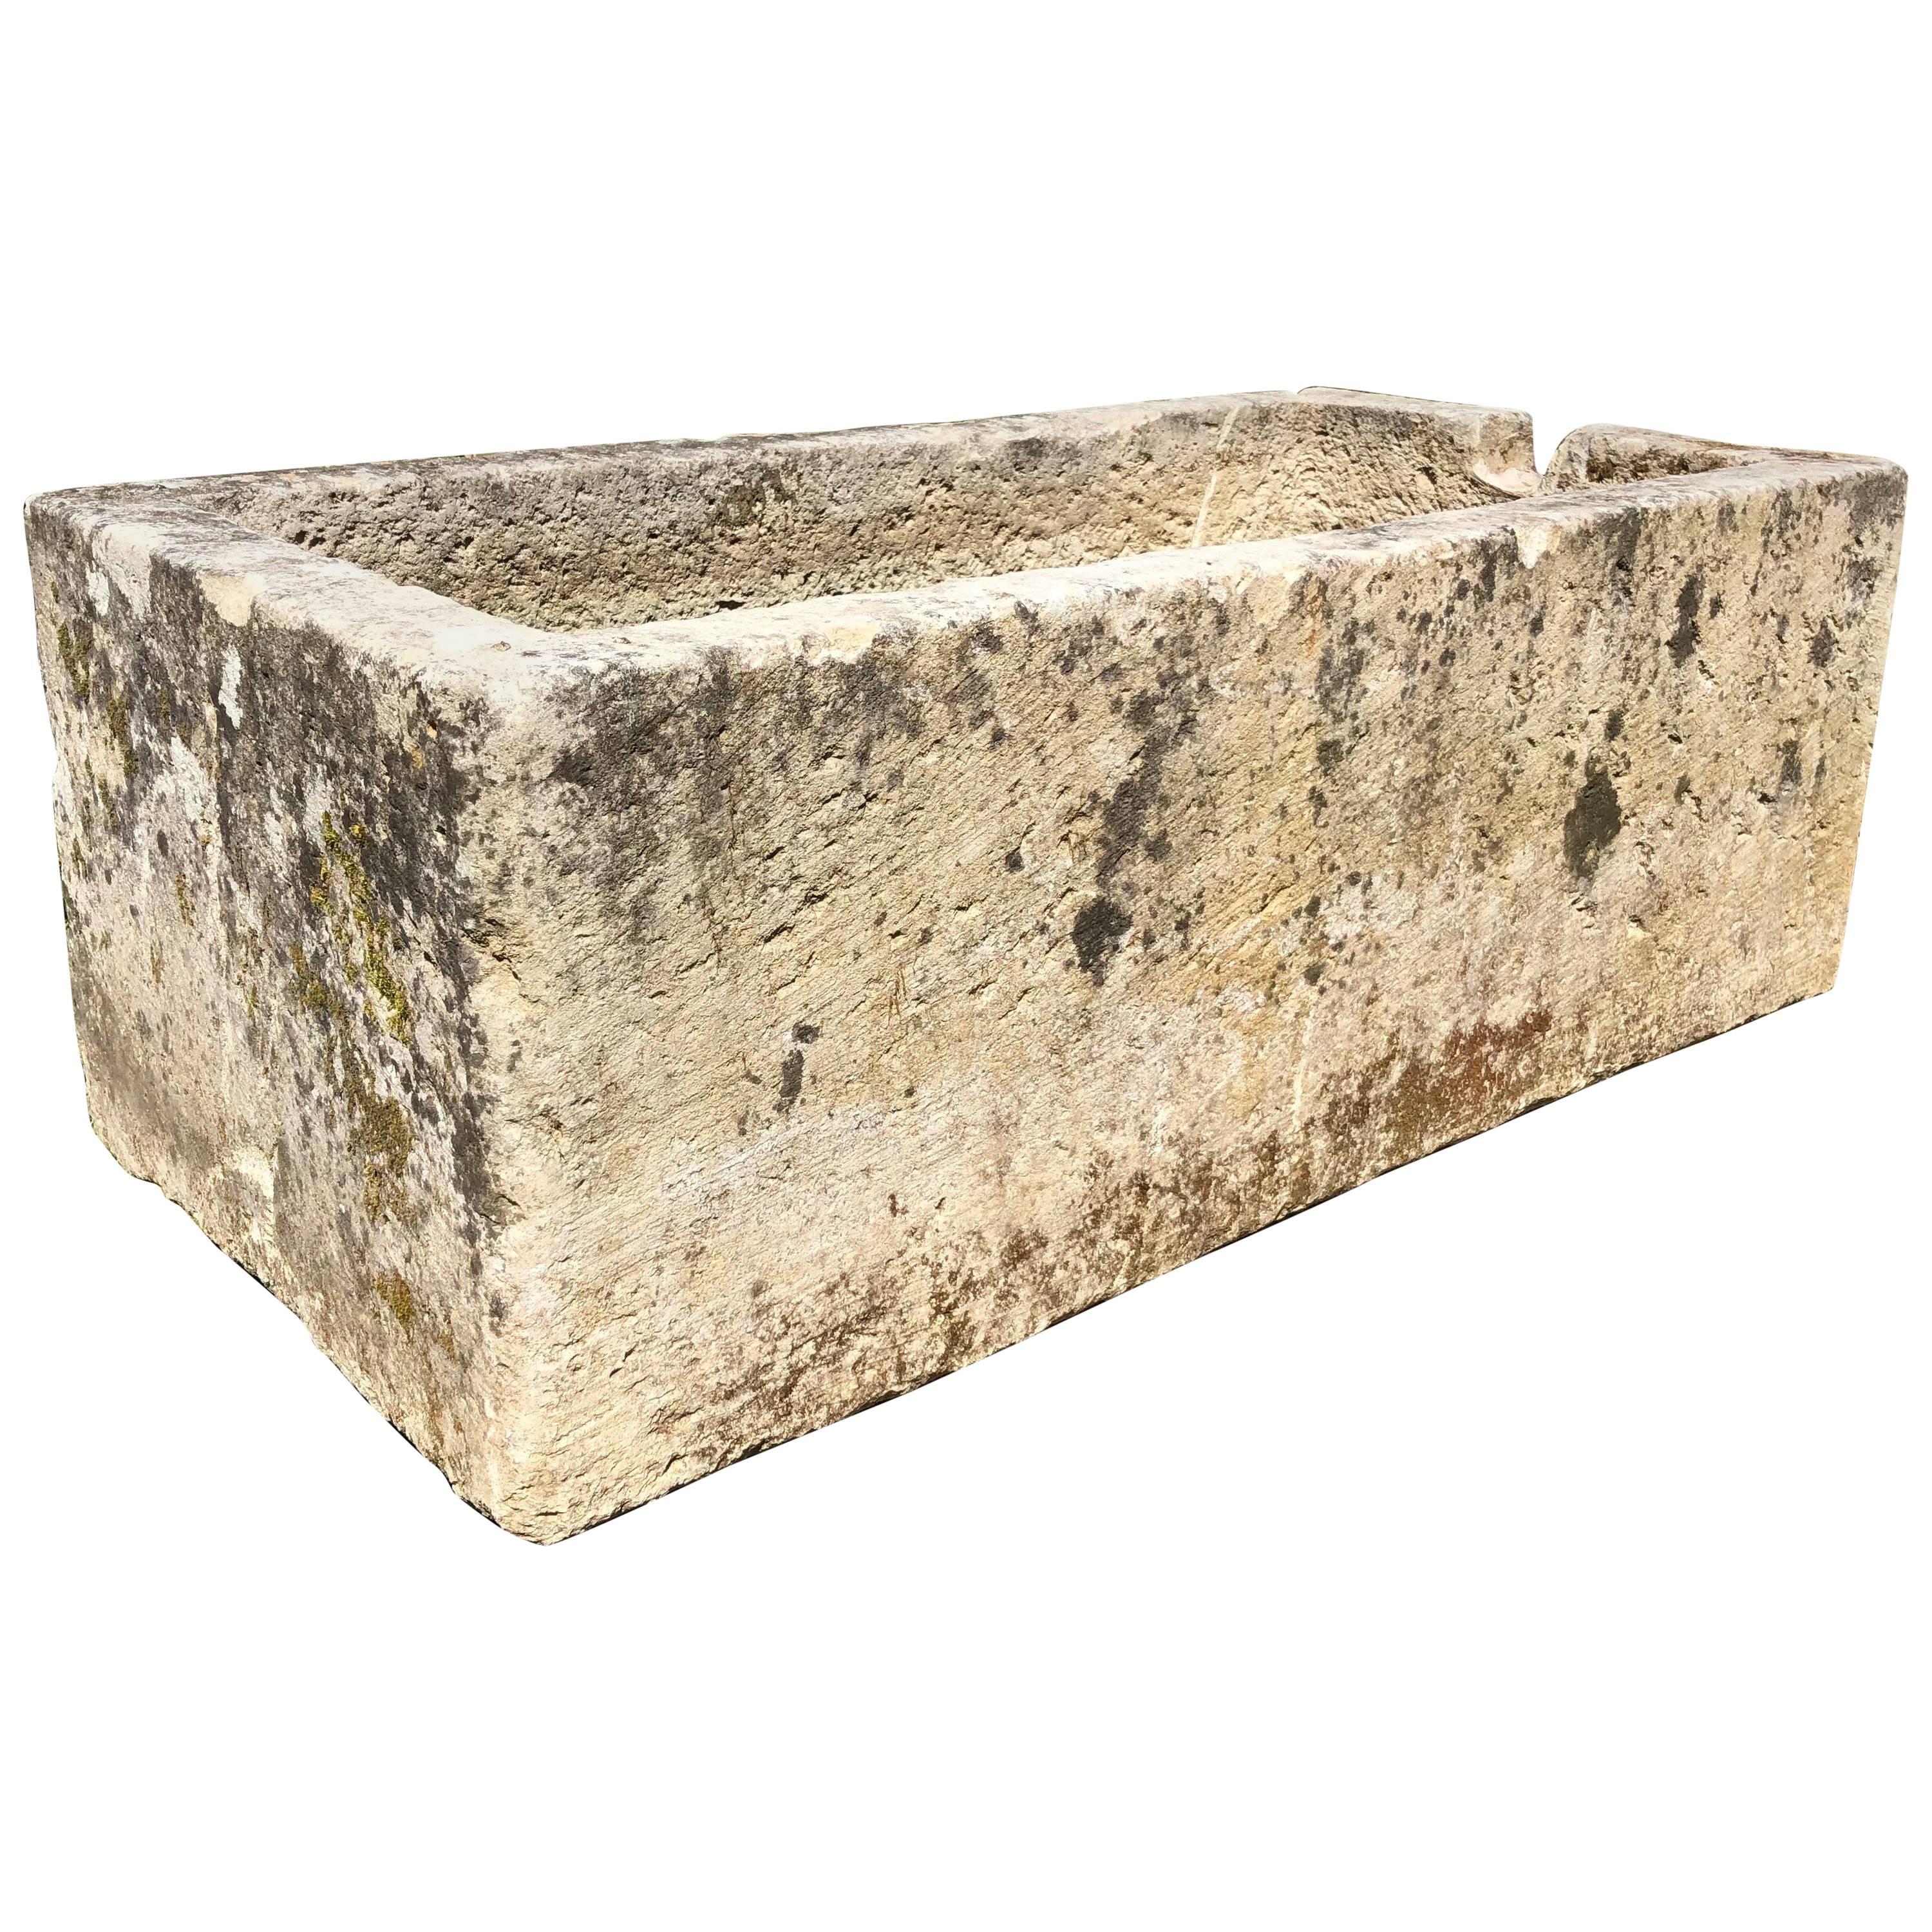 Huge French Hand-Carved Limestone Trough